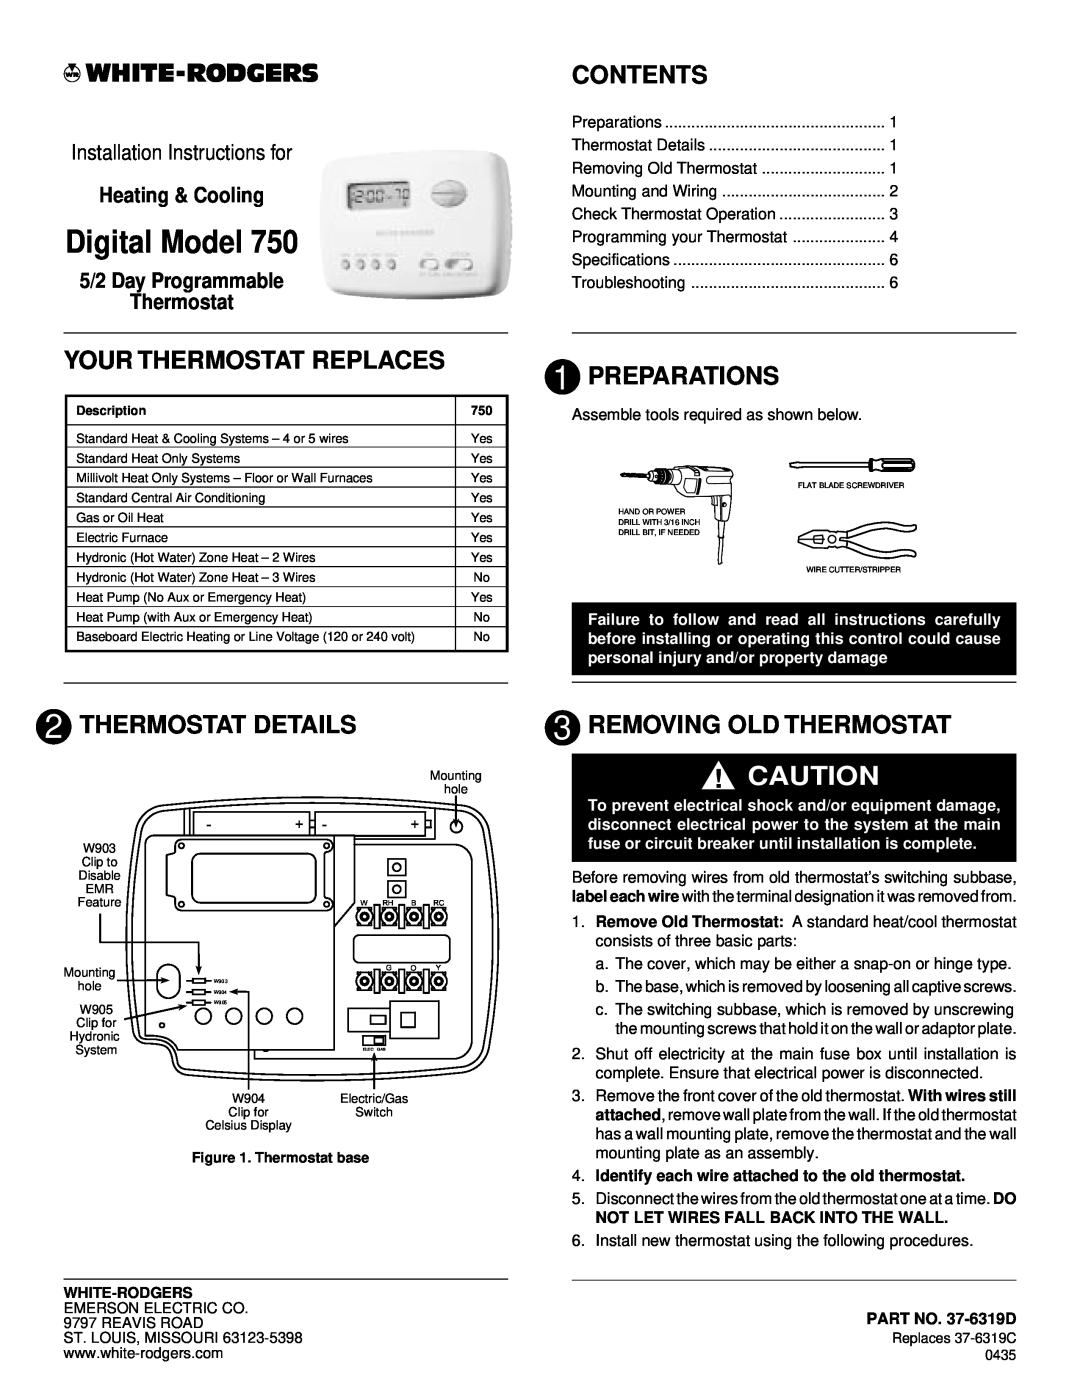 White Rodgers 750 installation instructions Contents, Your Thermostat Replaces, Preparations, Thermostat Details 